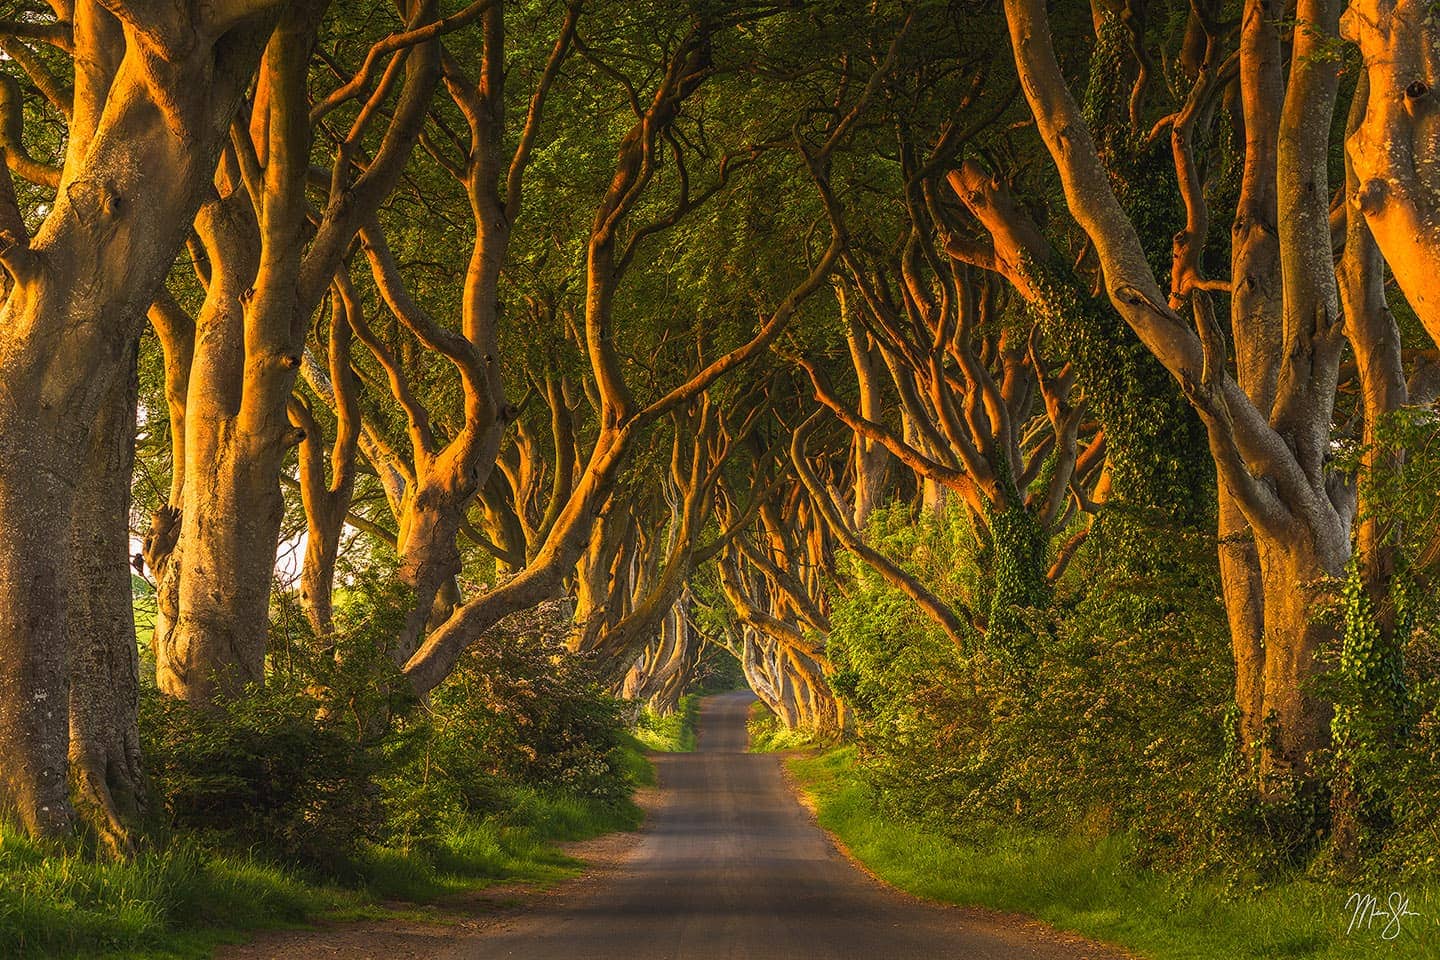 Tree Tunnels | Photographs of the most beautiful tree tunnels in the world!